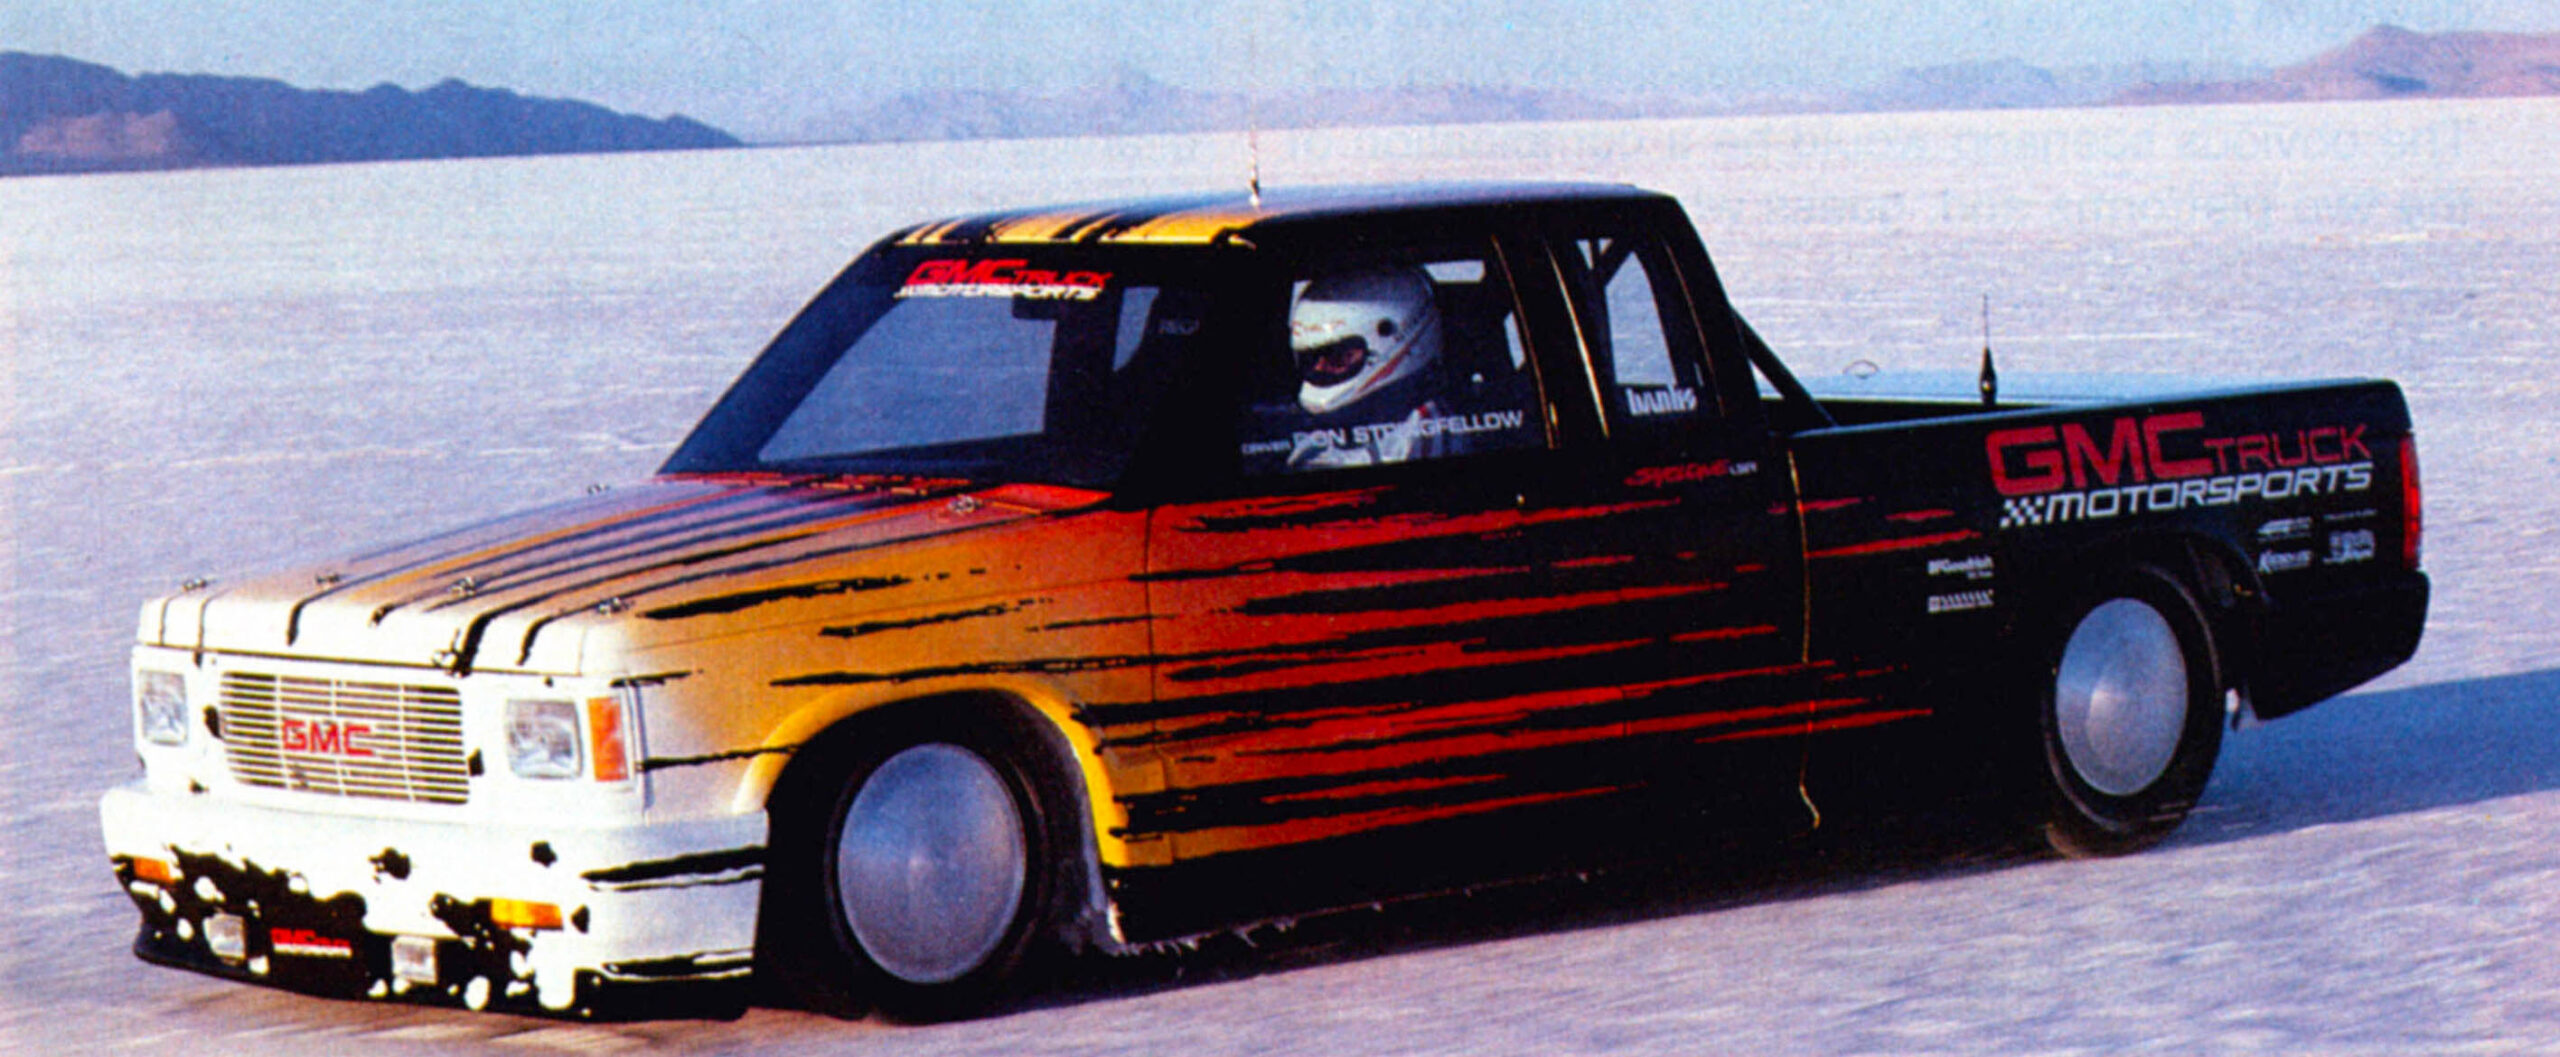 Syclone Land Speed Record Truck